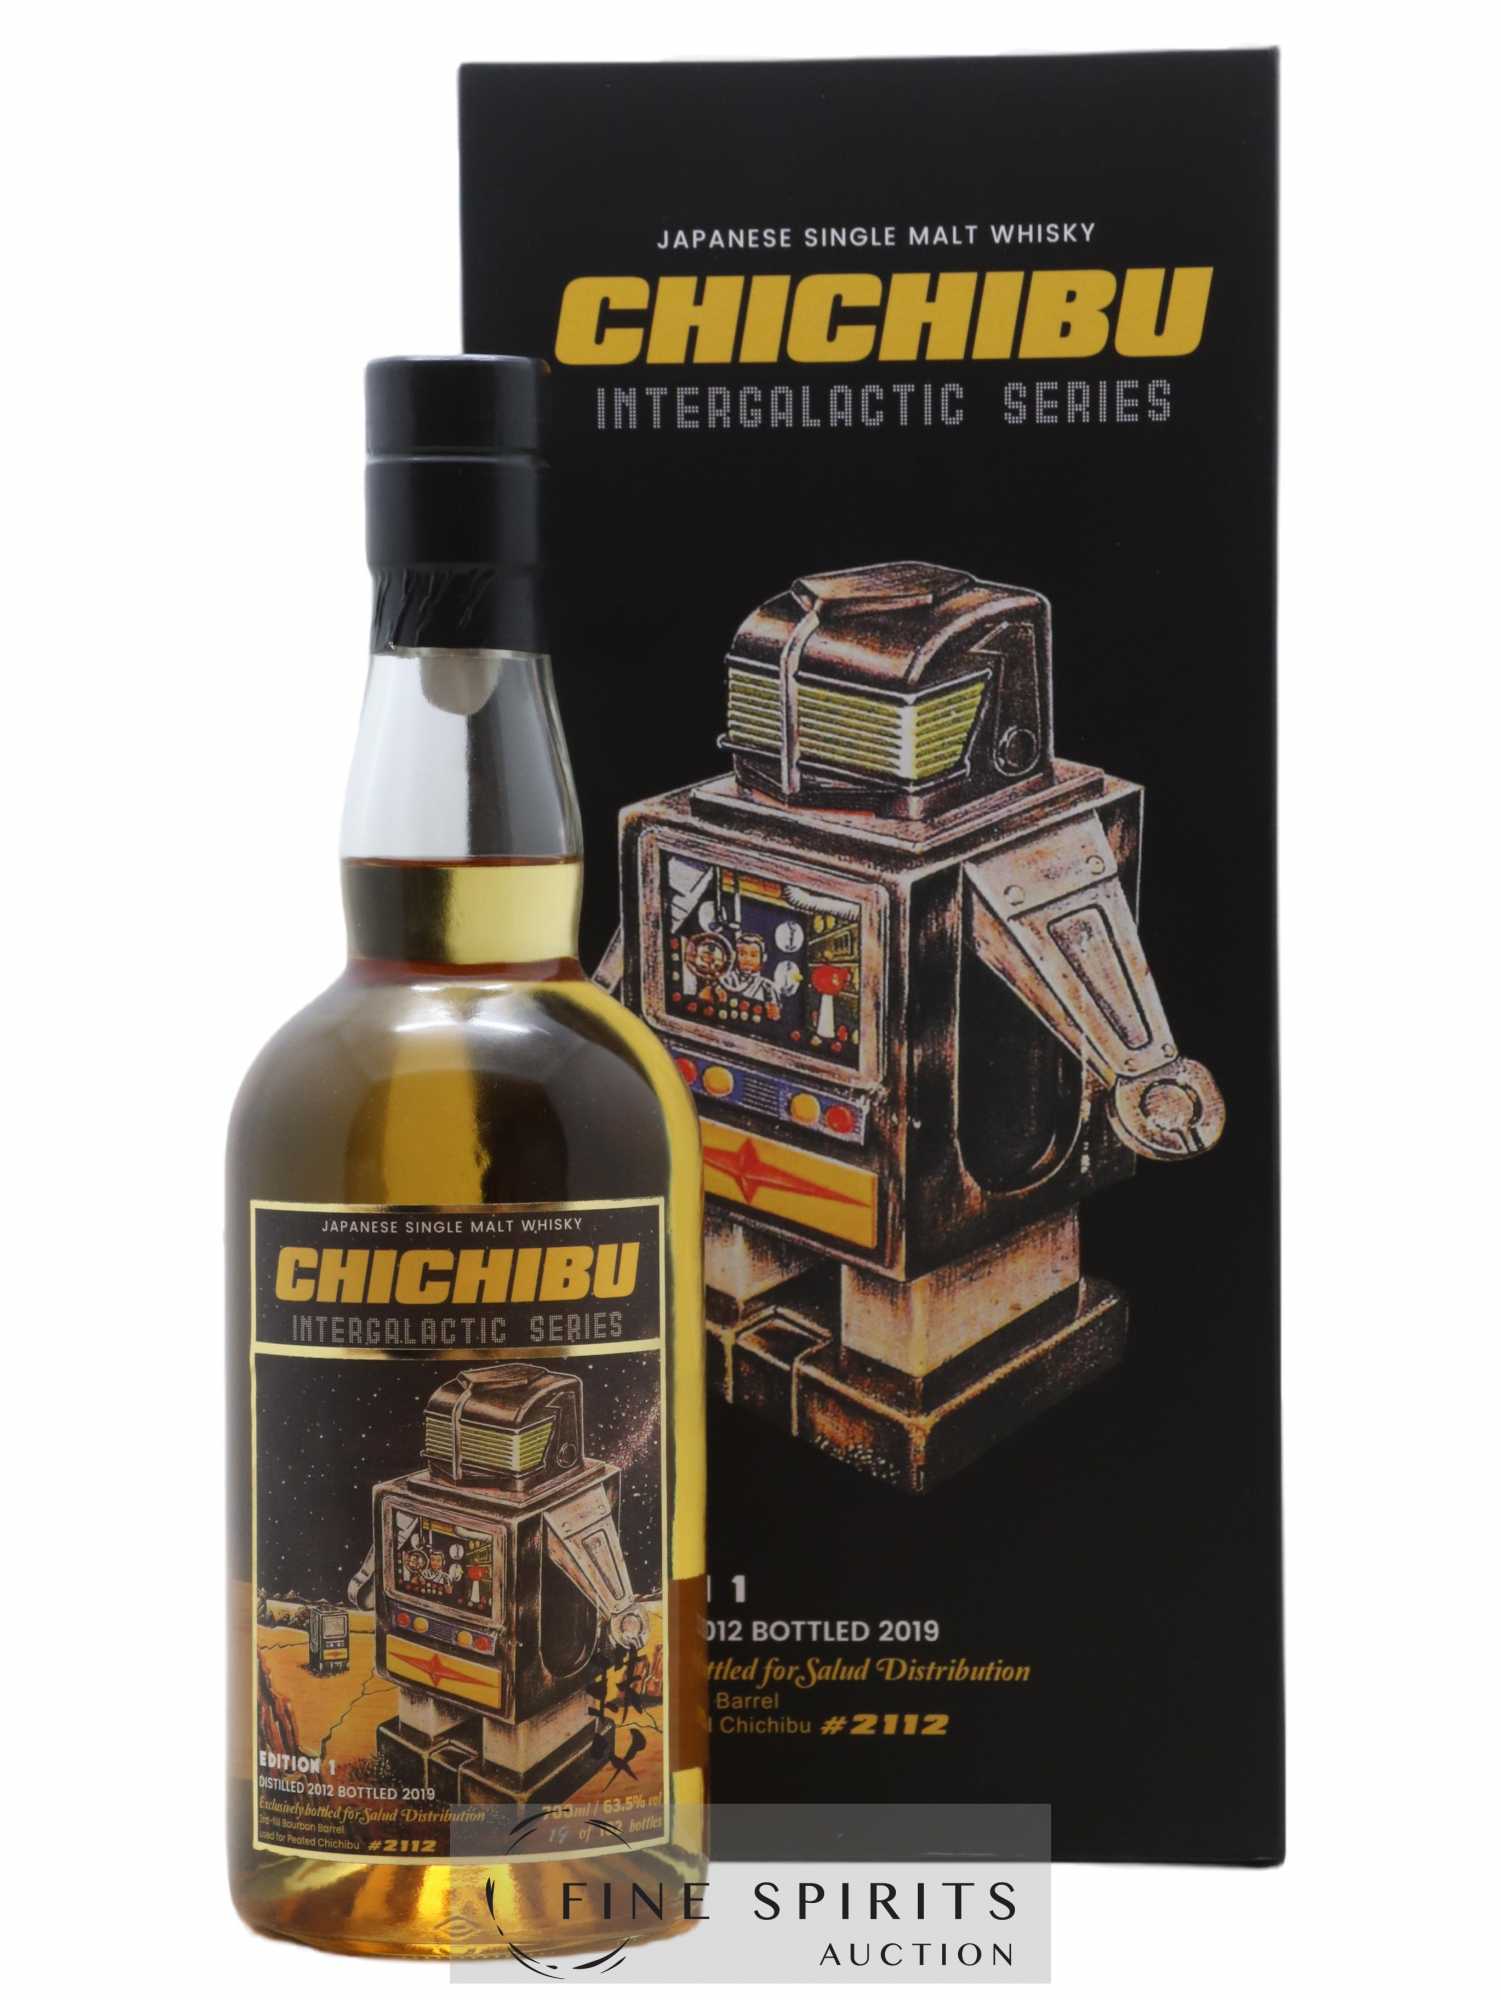 Chichibu Of. Intergalactic Series - Edition 1 Cask n°2112 - One of 182 - bottled 2019 Salud Distribution 